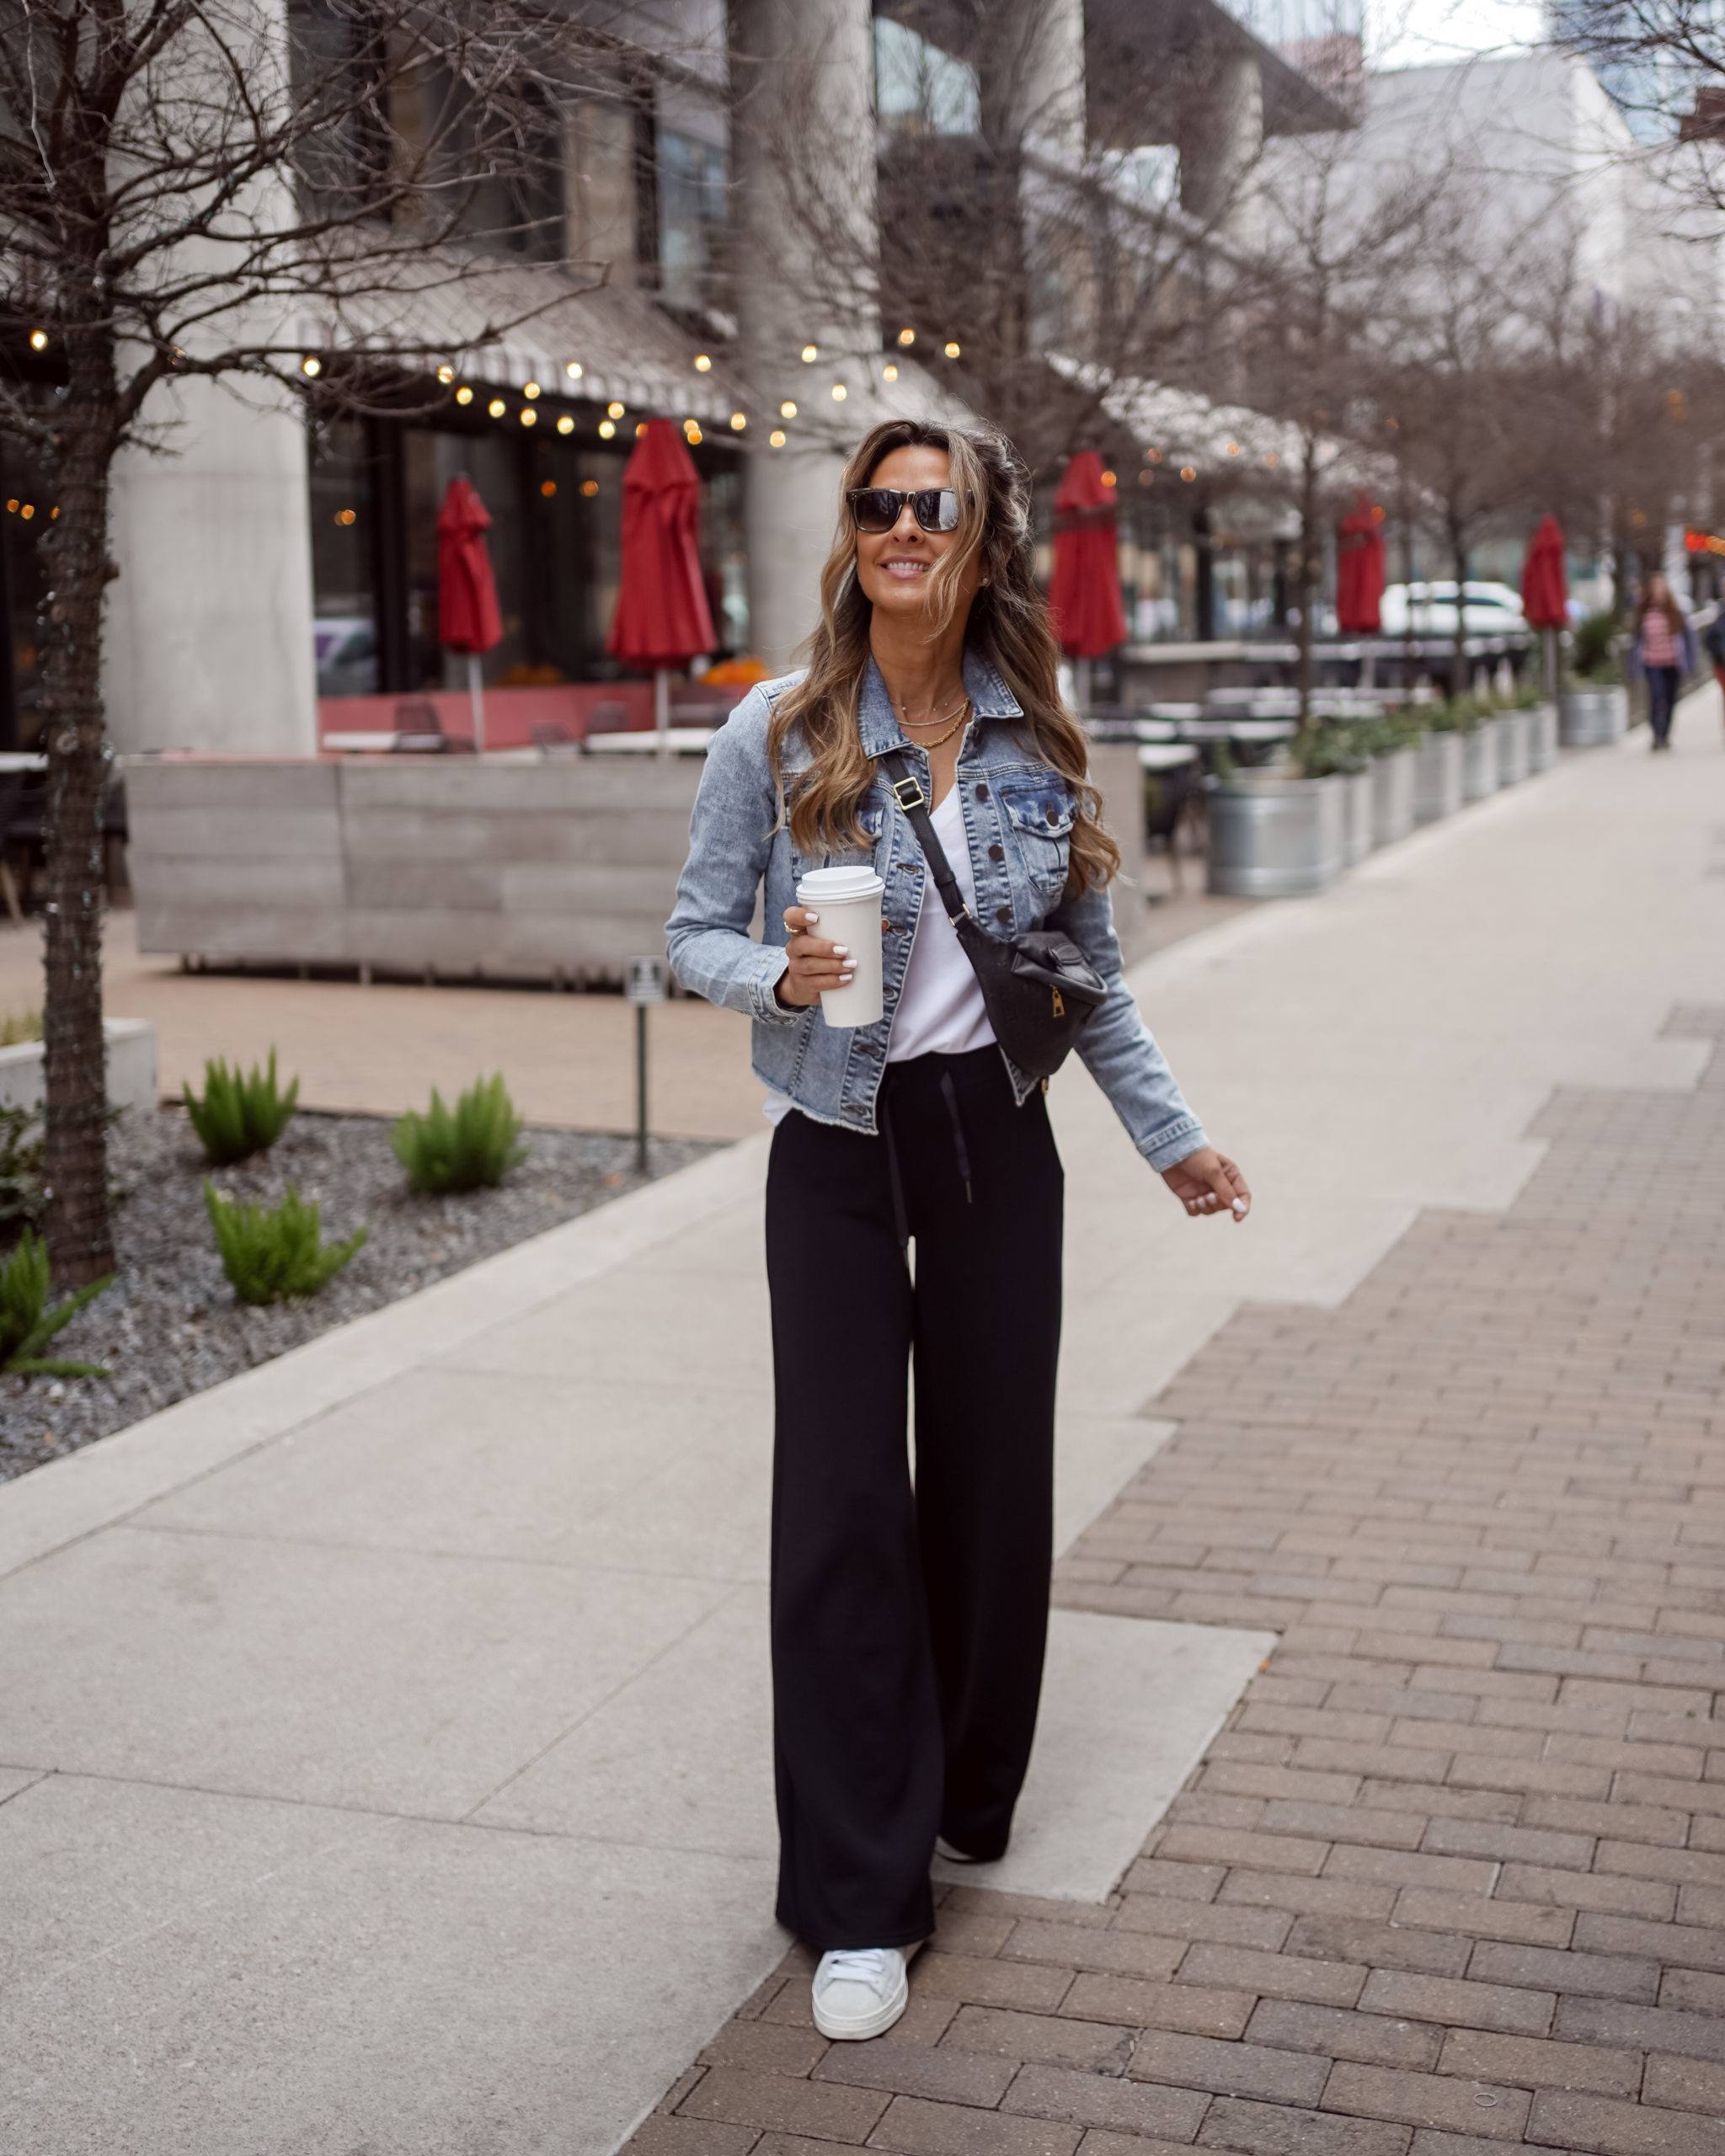 How To Style Wide Legged Pants If You're Short Without